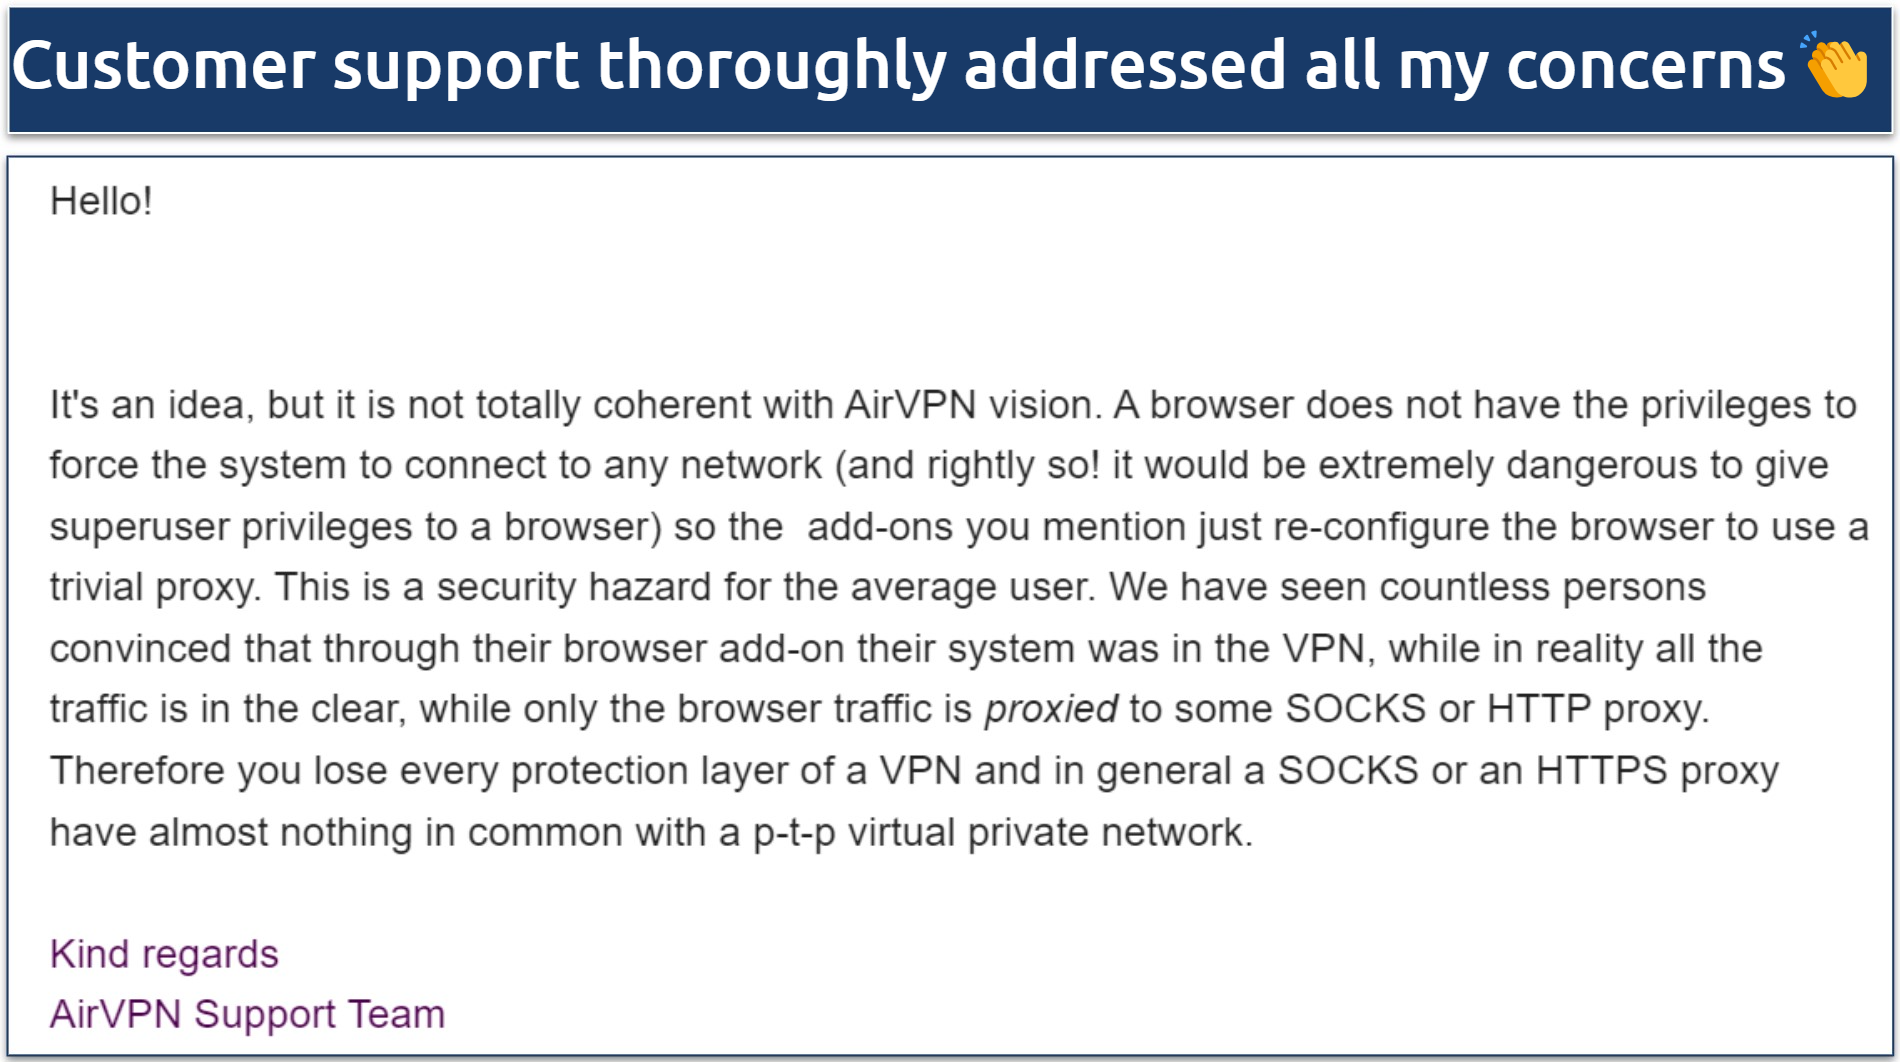 A screenshot showing AirVPN's support team clarifying the reasons behind the lack of browser extensions